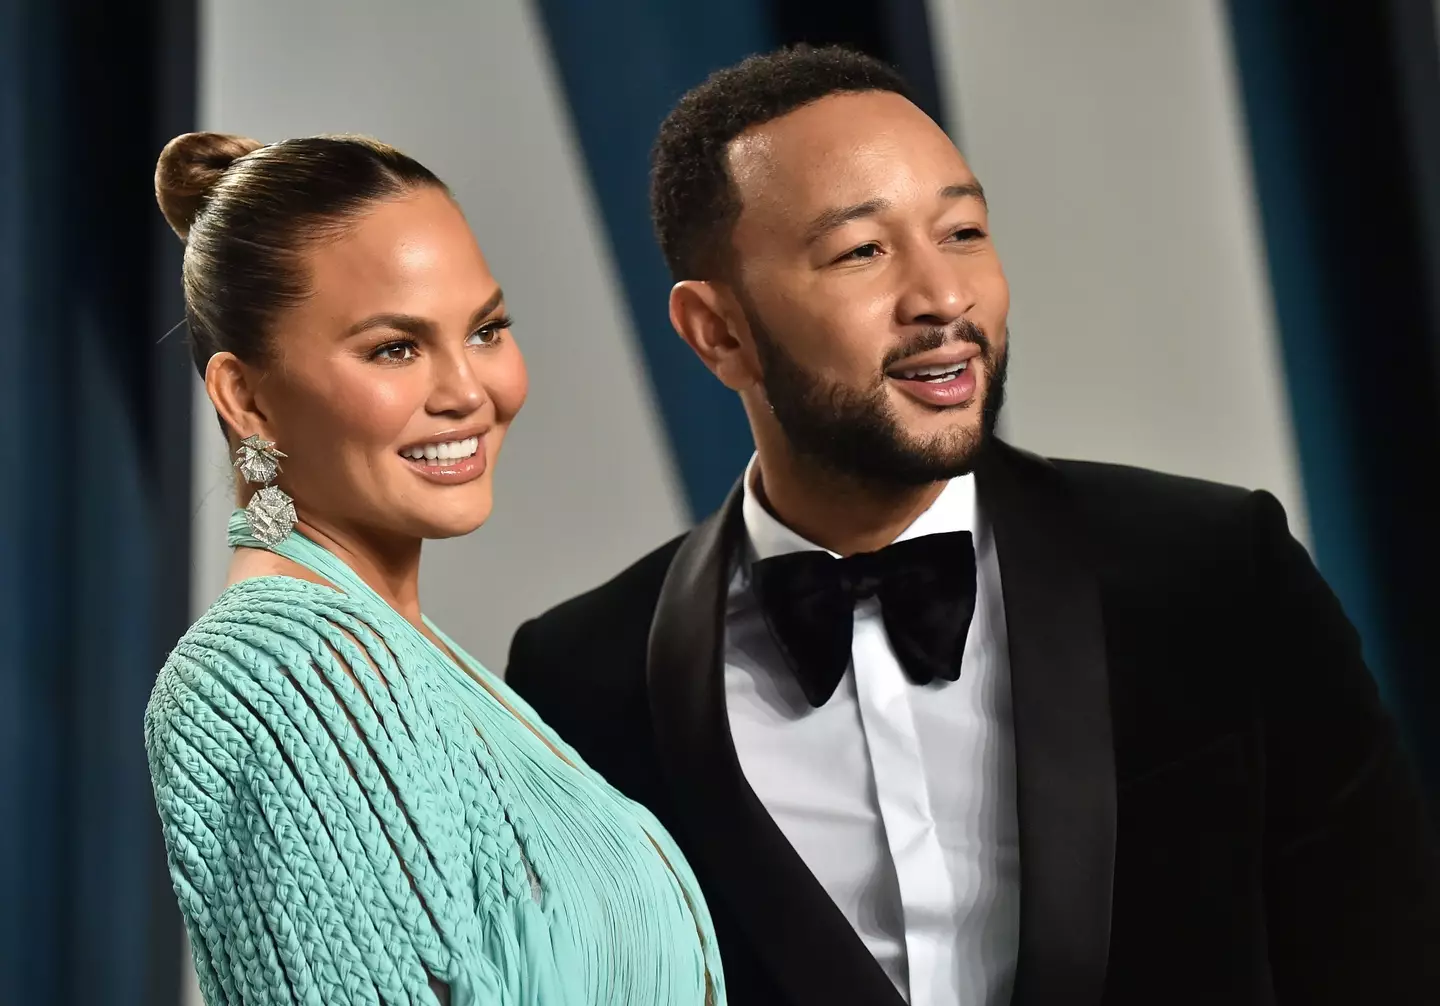 John Legend and Chrissy Teigen recently welcomed their fourth child.